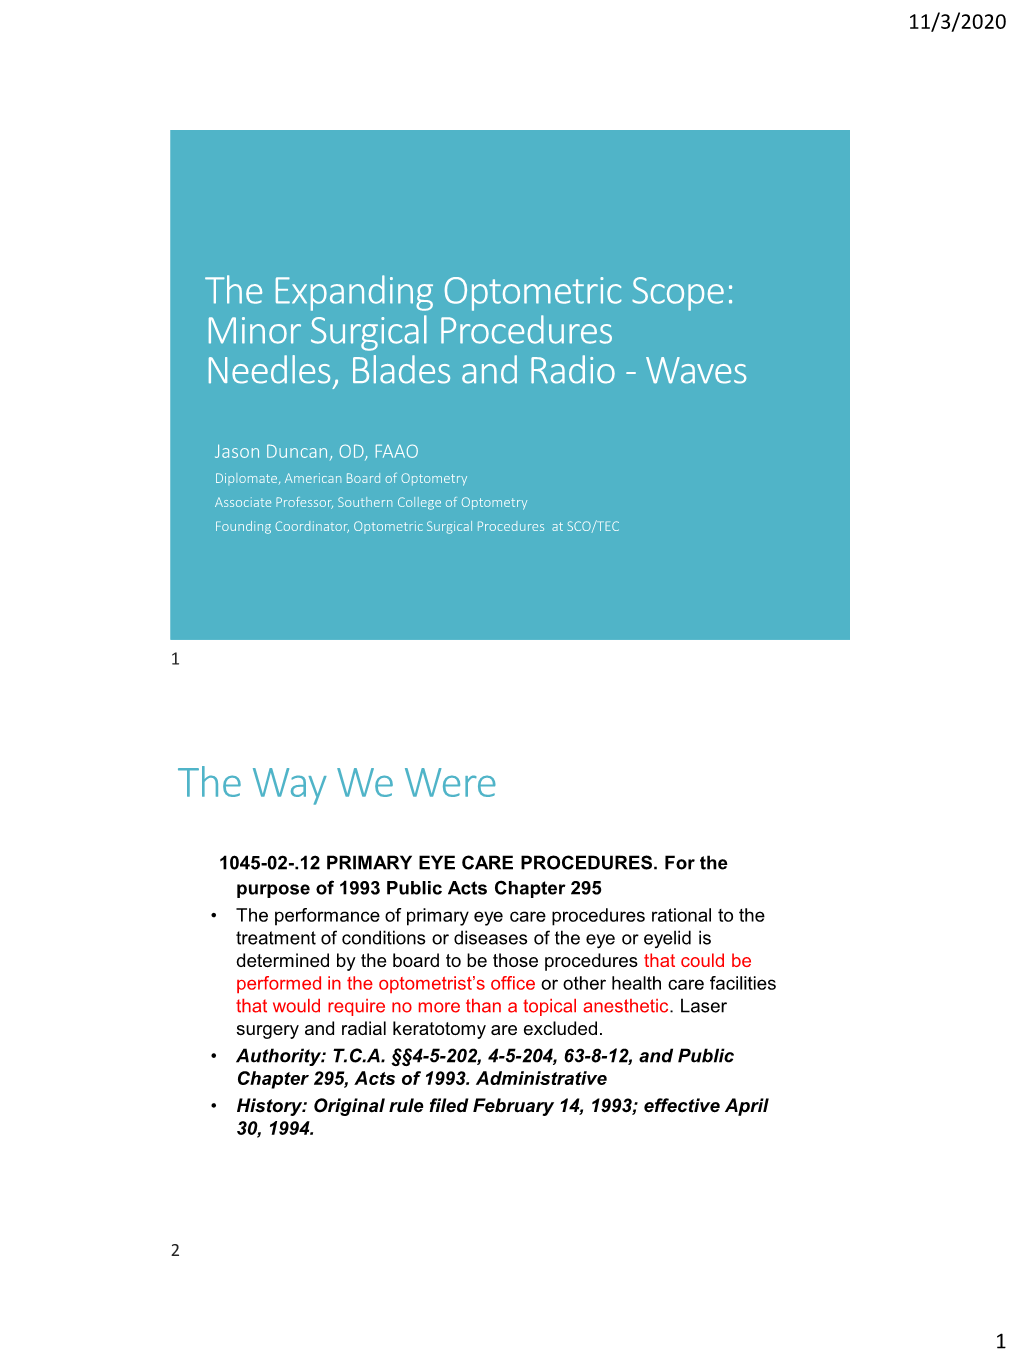 The Expanding Optometric Scope: Minor Surgical Procedures Needles, Blades and Radio - Waves